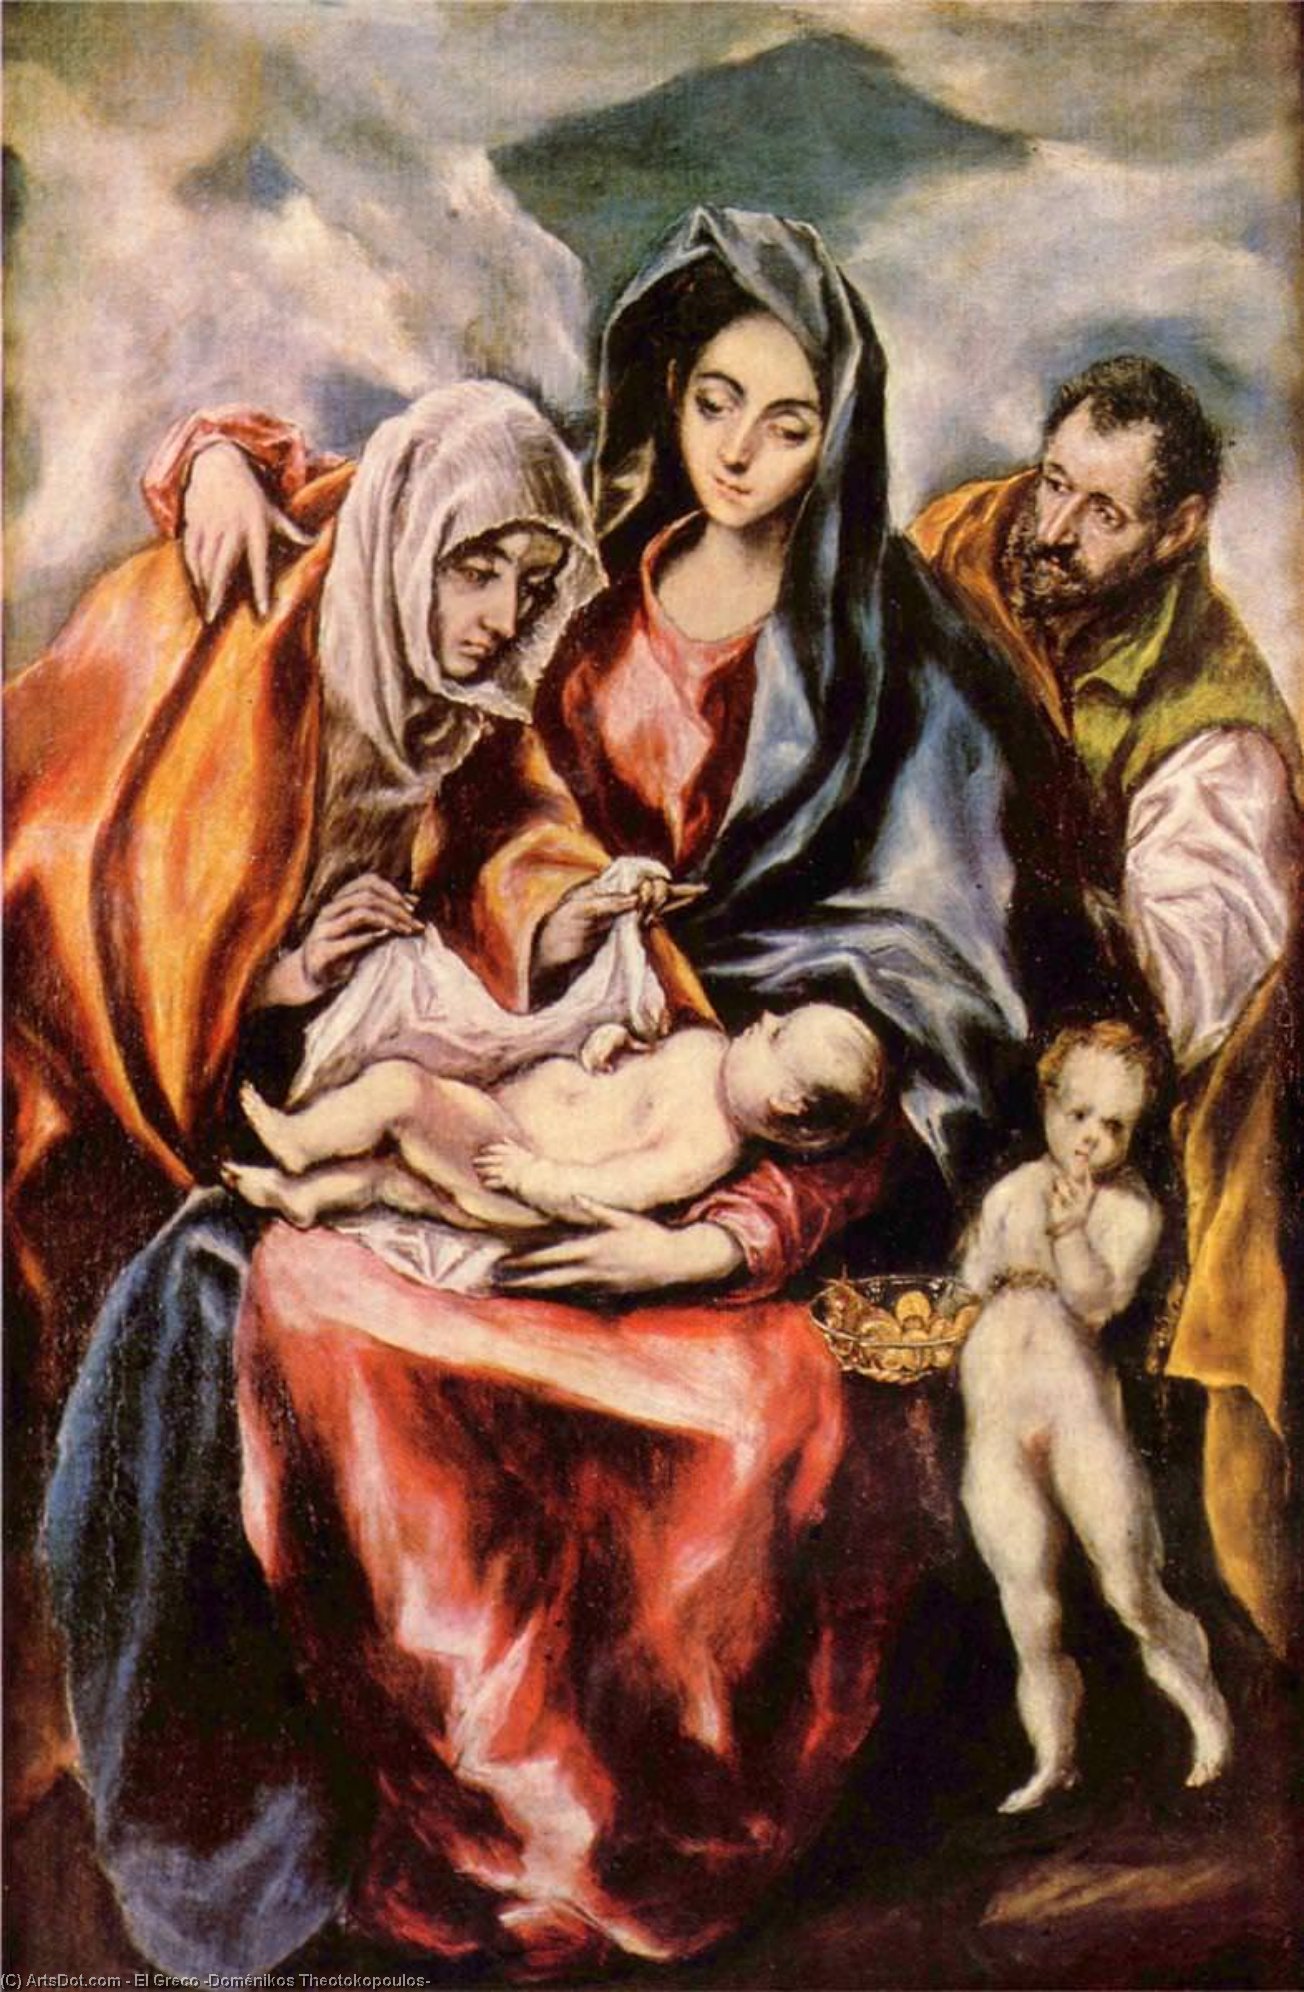 WikiOO.org - Encyclopedia of Fine Arts - Lukisan, Artwork El Greco (Doménikos Theotokopoulos) - The Holy Family with St. Anne and the Young St. John the Baptist